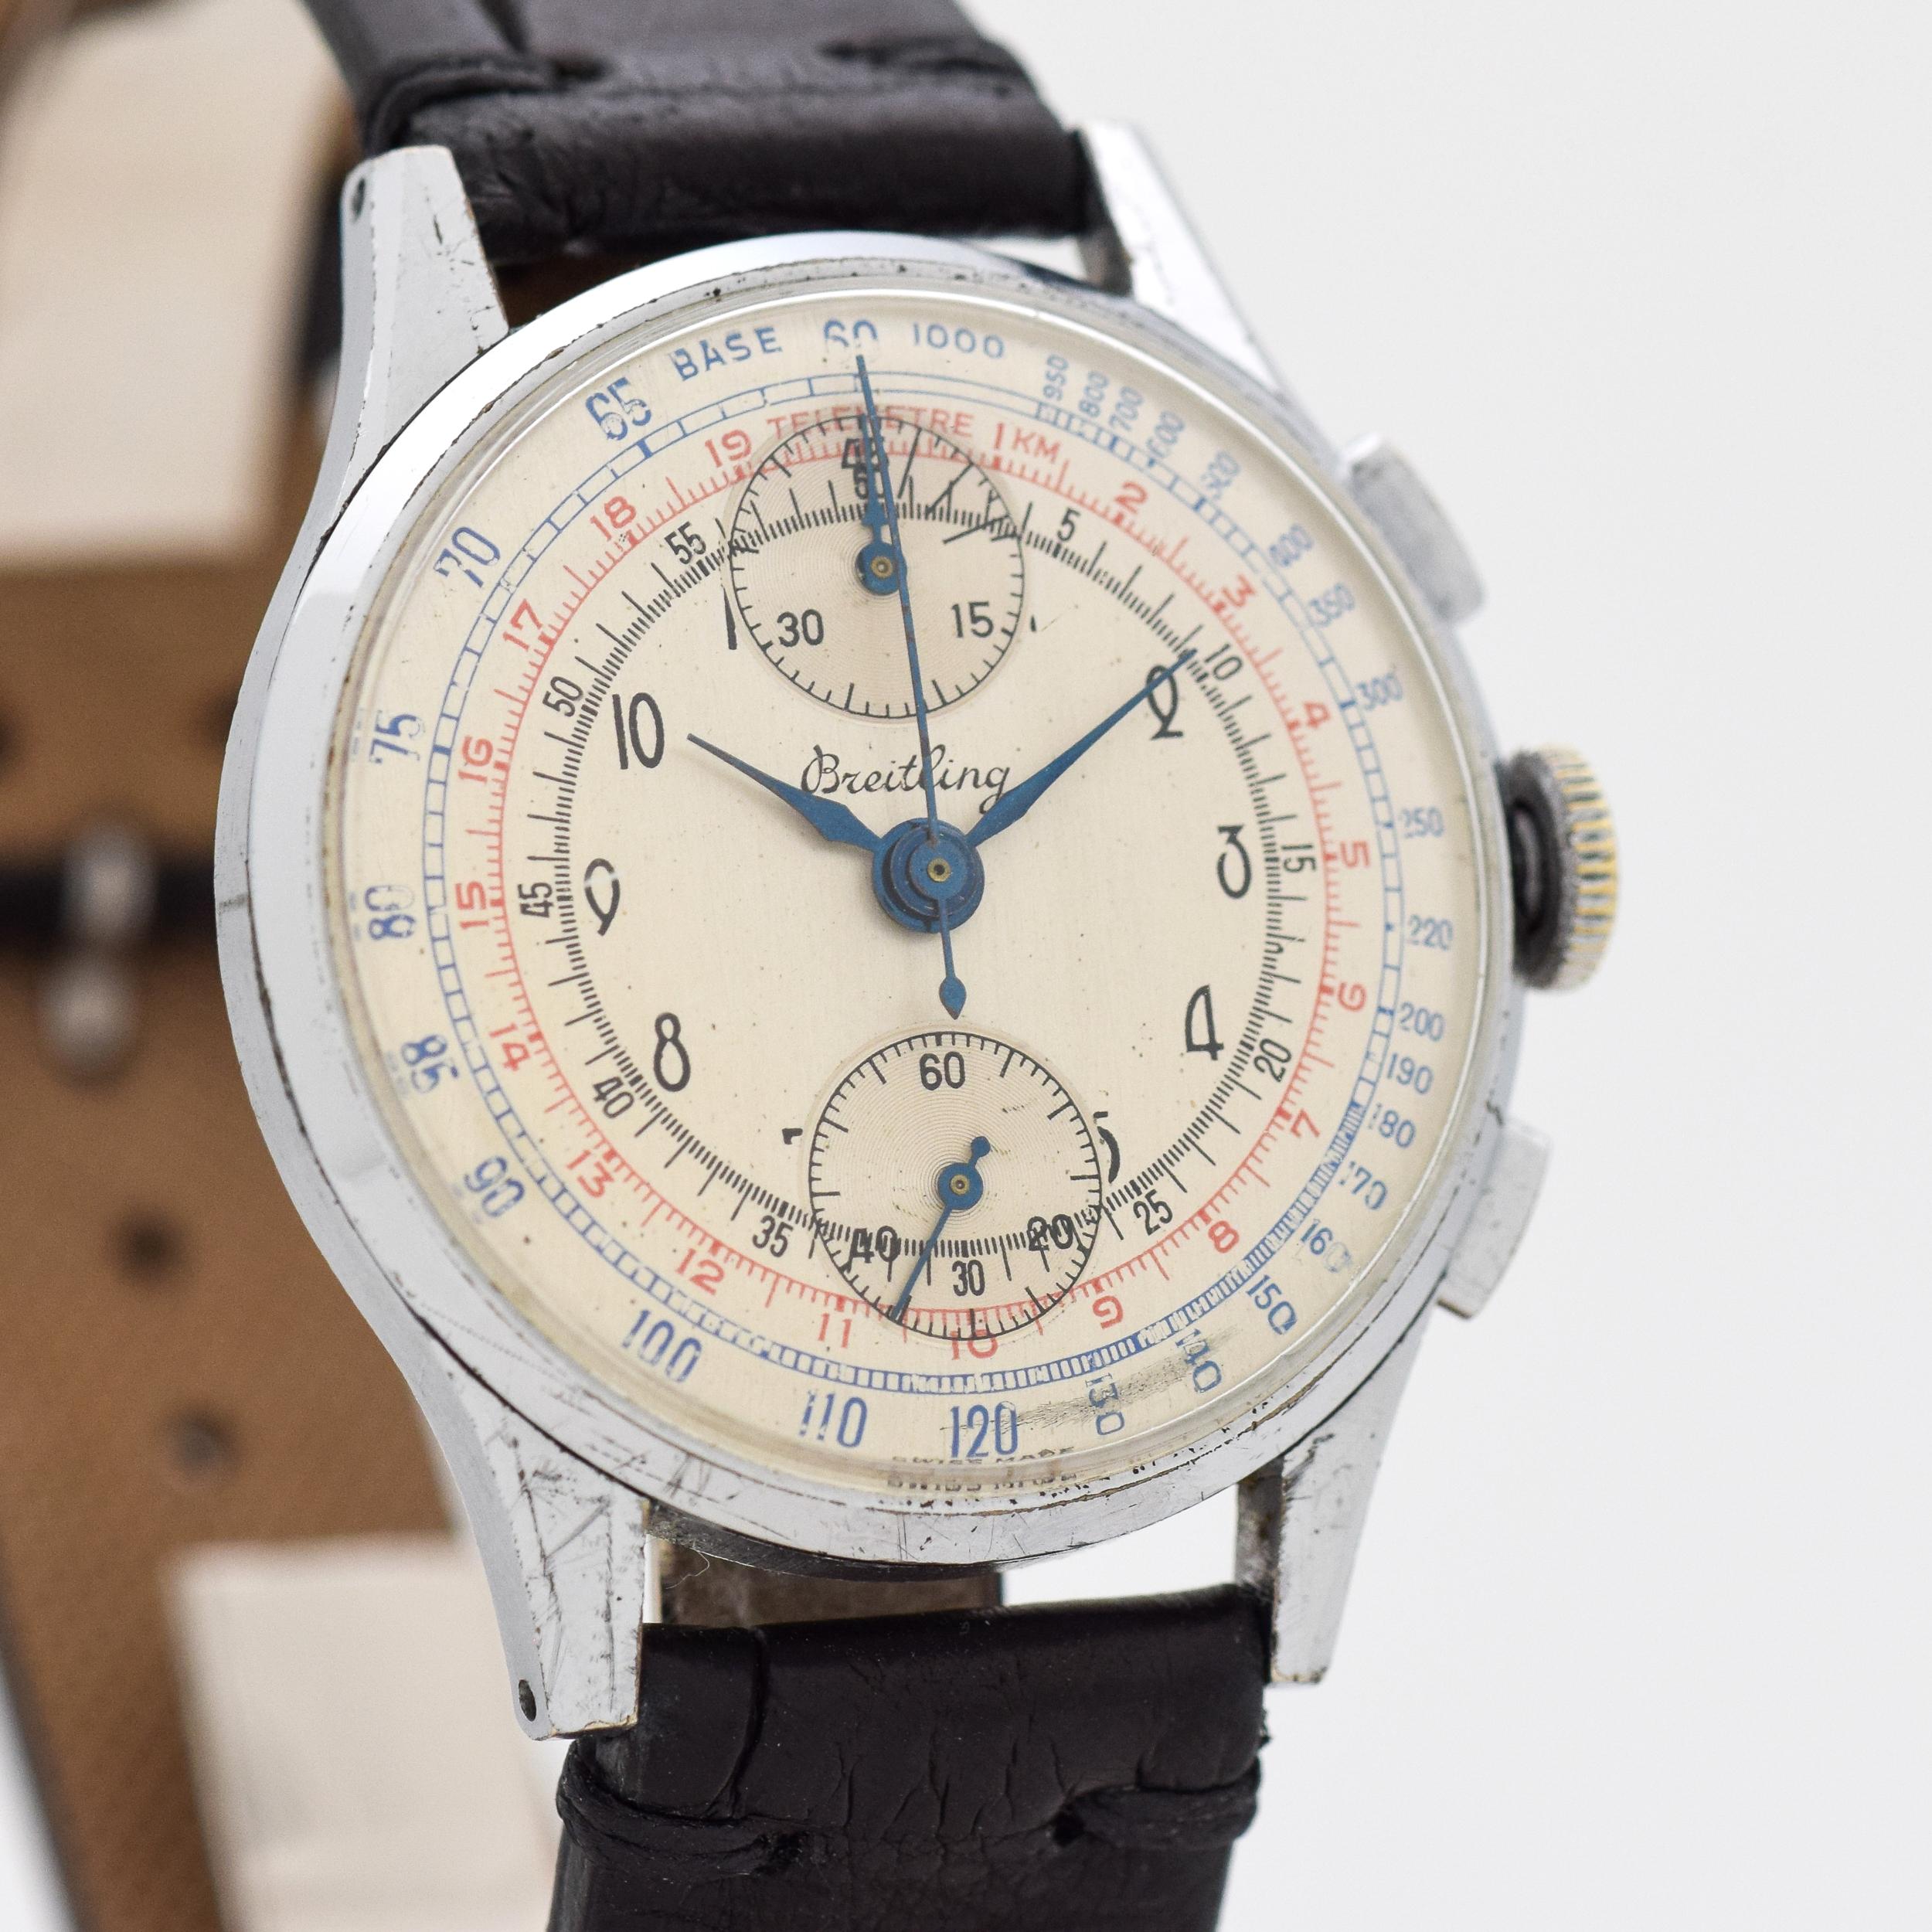 1946 Vintage Breitling 2 Register Chronograph Ref. 178 Chrome with Stainless Steel Case Back watch with Original Silver Dial with Black Arabic Numbers with Blue Outer Track and Red Inner Track. 36mm x 41mm lug to lug (1.42 in. x 1.61 in.) - 17